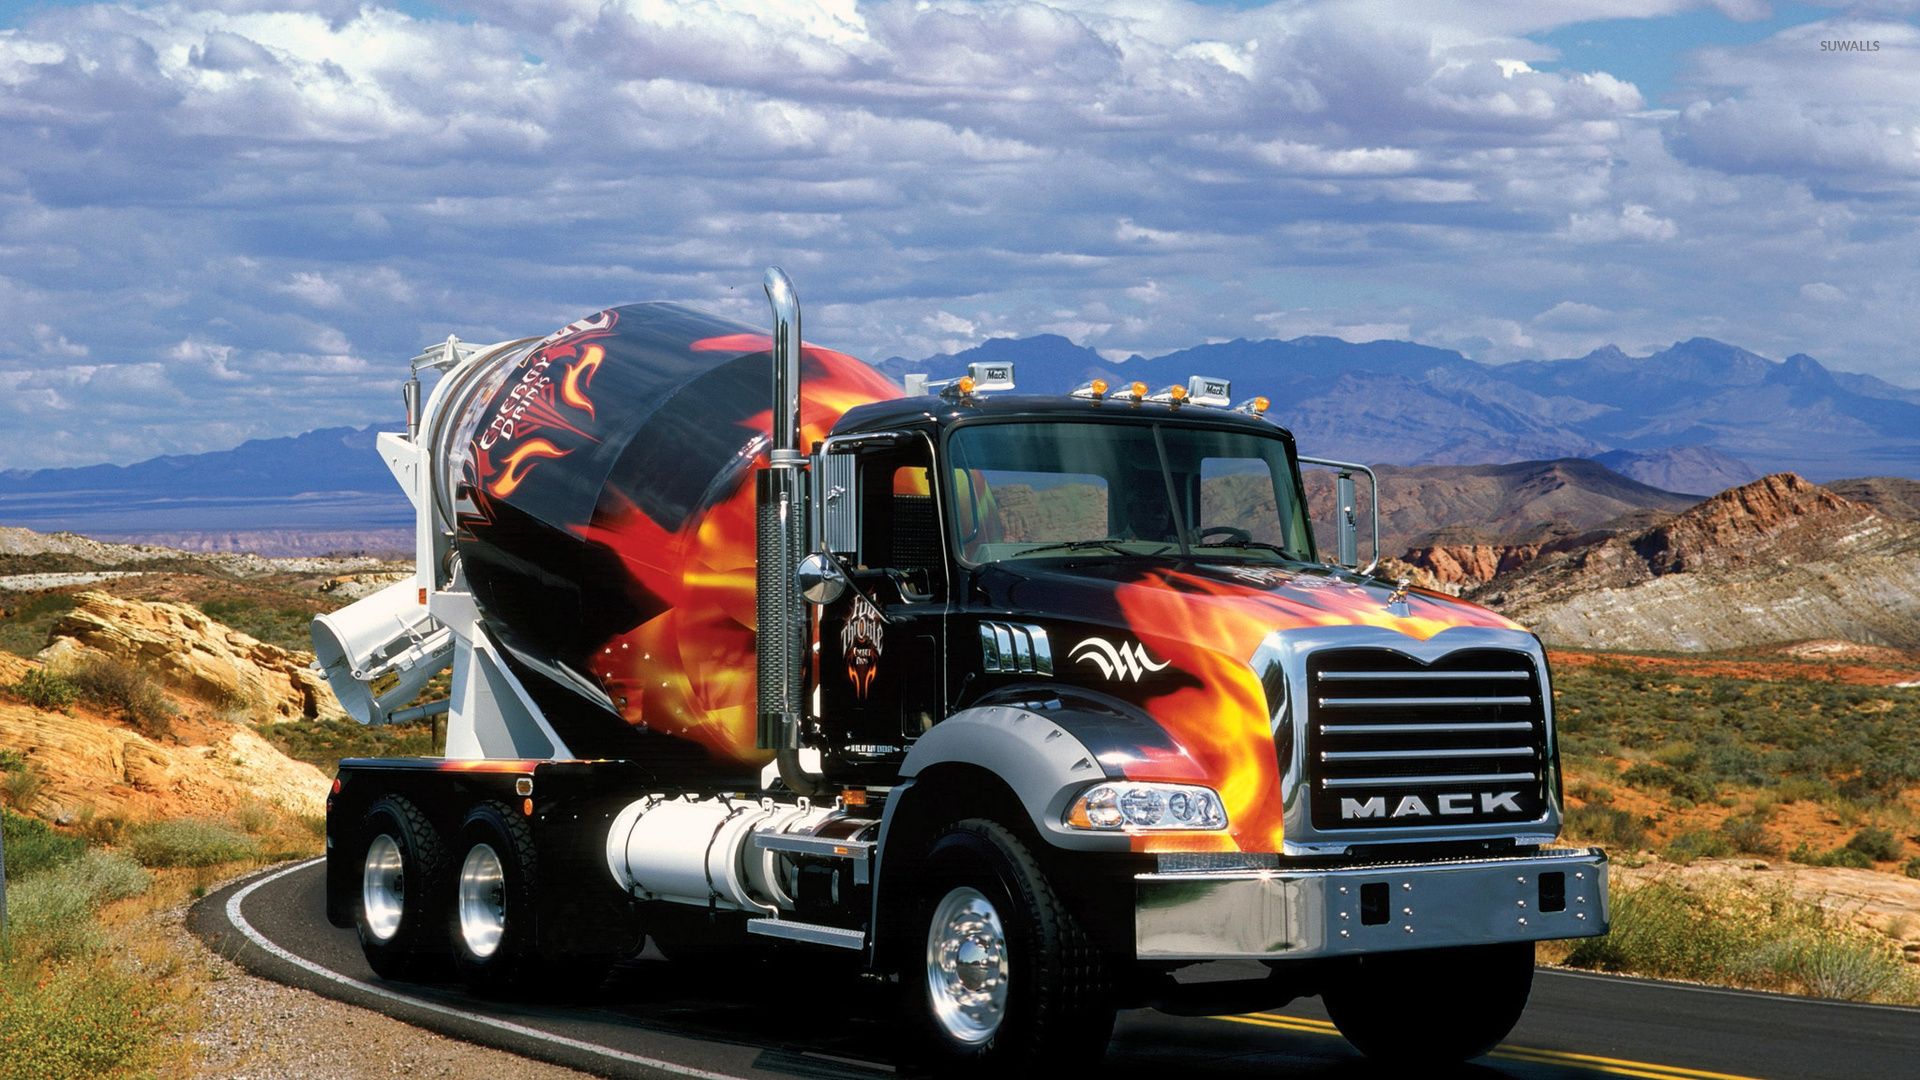 Cars Mack Truck Wallpaper. Awesome Cars Wallpaper, Disney Cars Wallpaper and Cool Cars Wallpaper